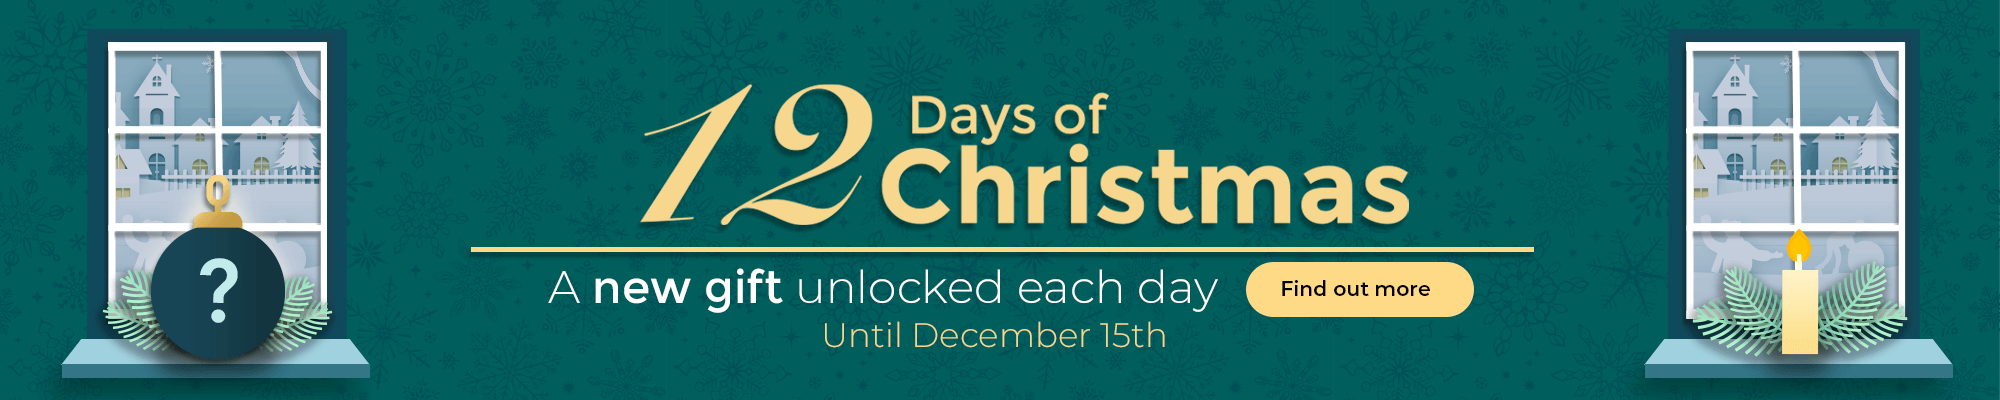 12 Days of Christmas. A new gift unlocked each day until 15th December. Find out more